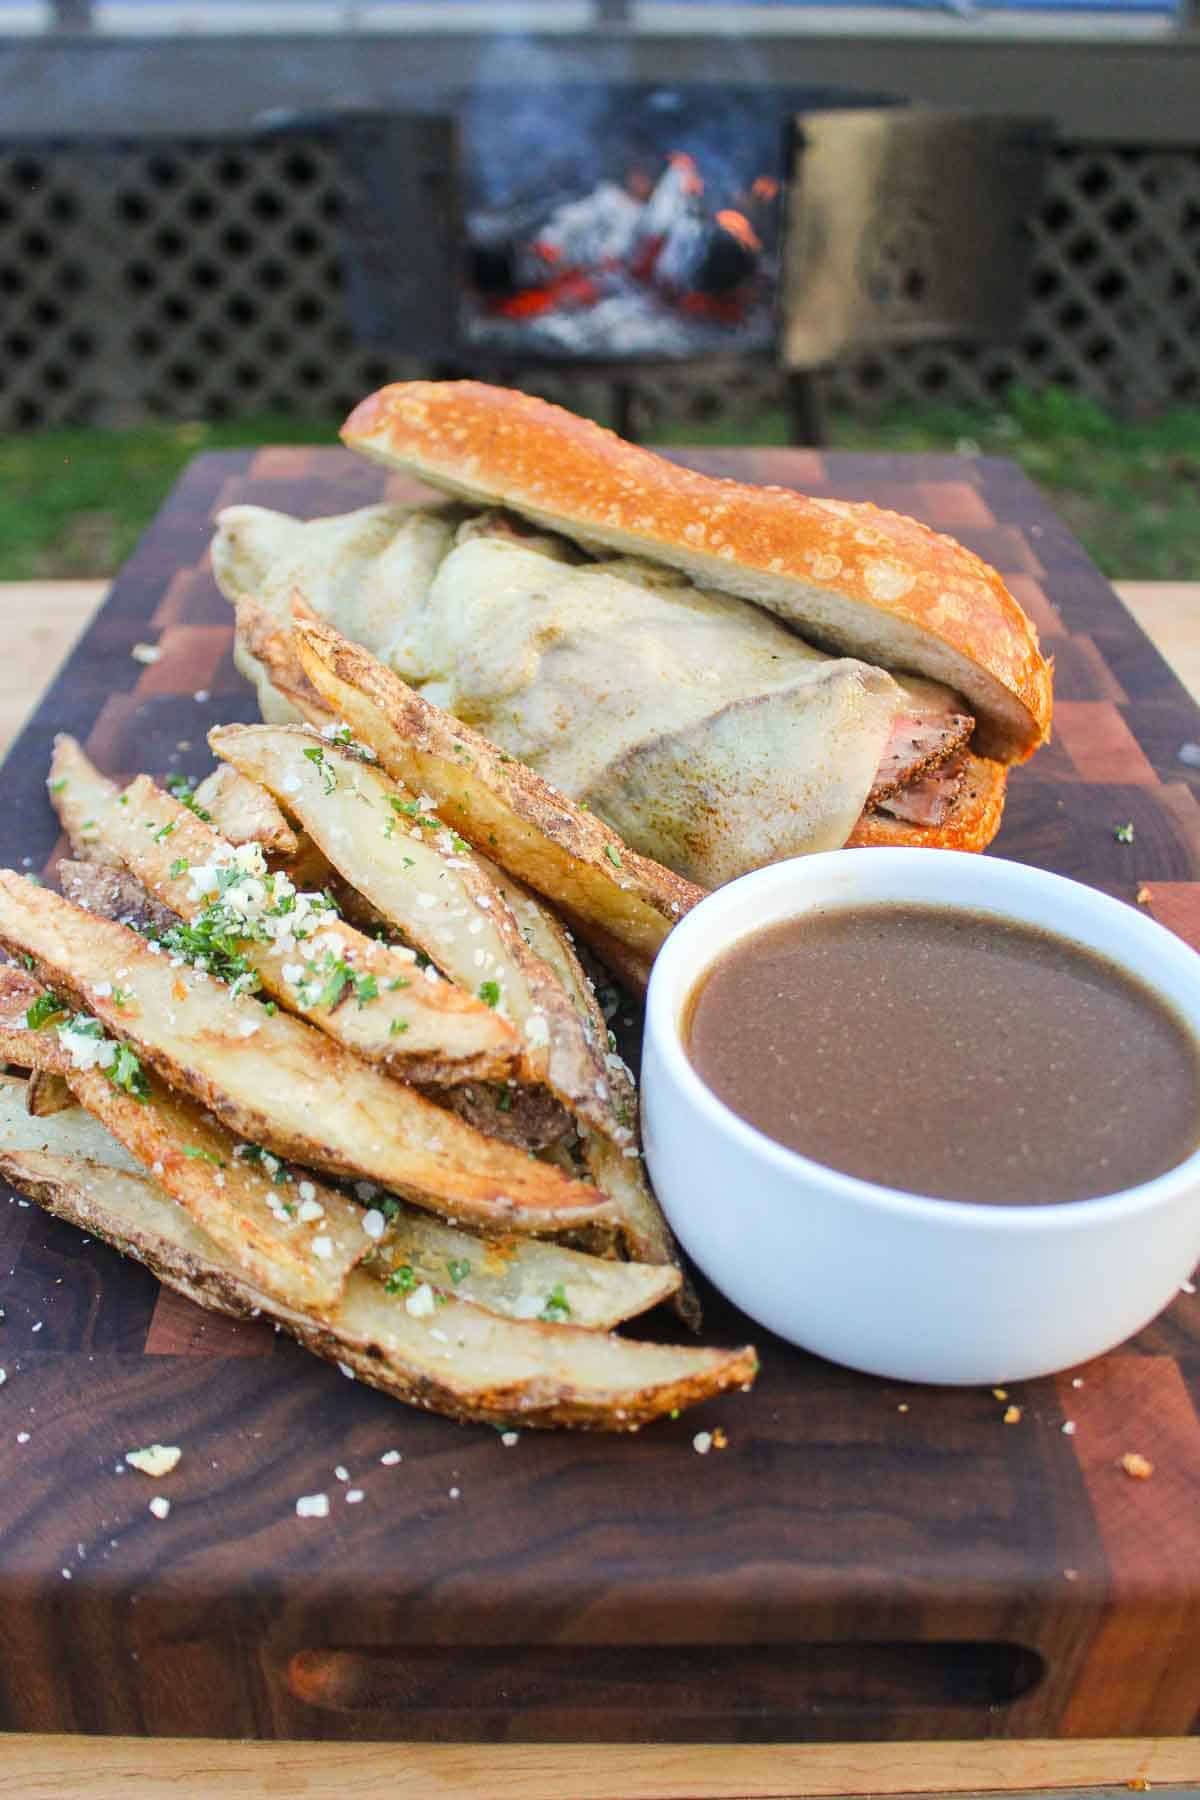 One final shot of the grilled French dip